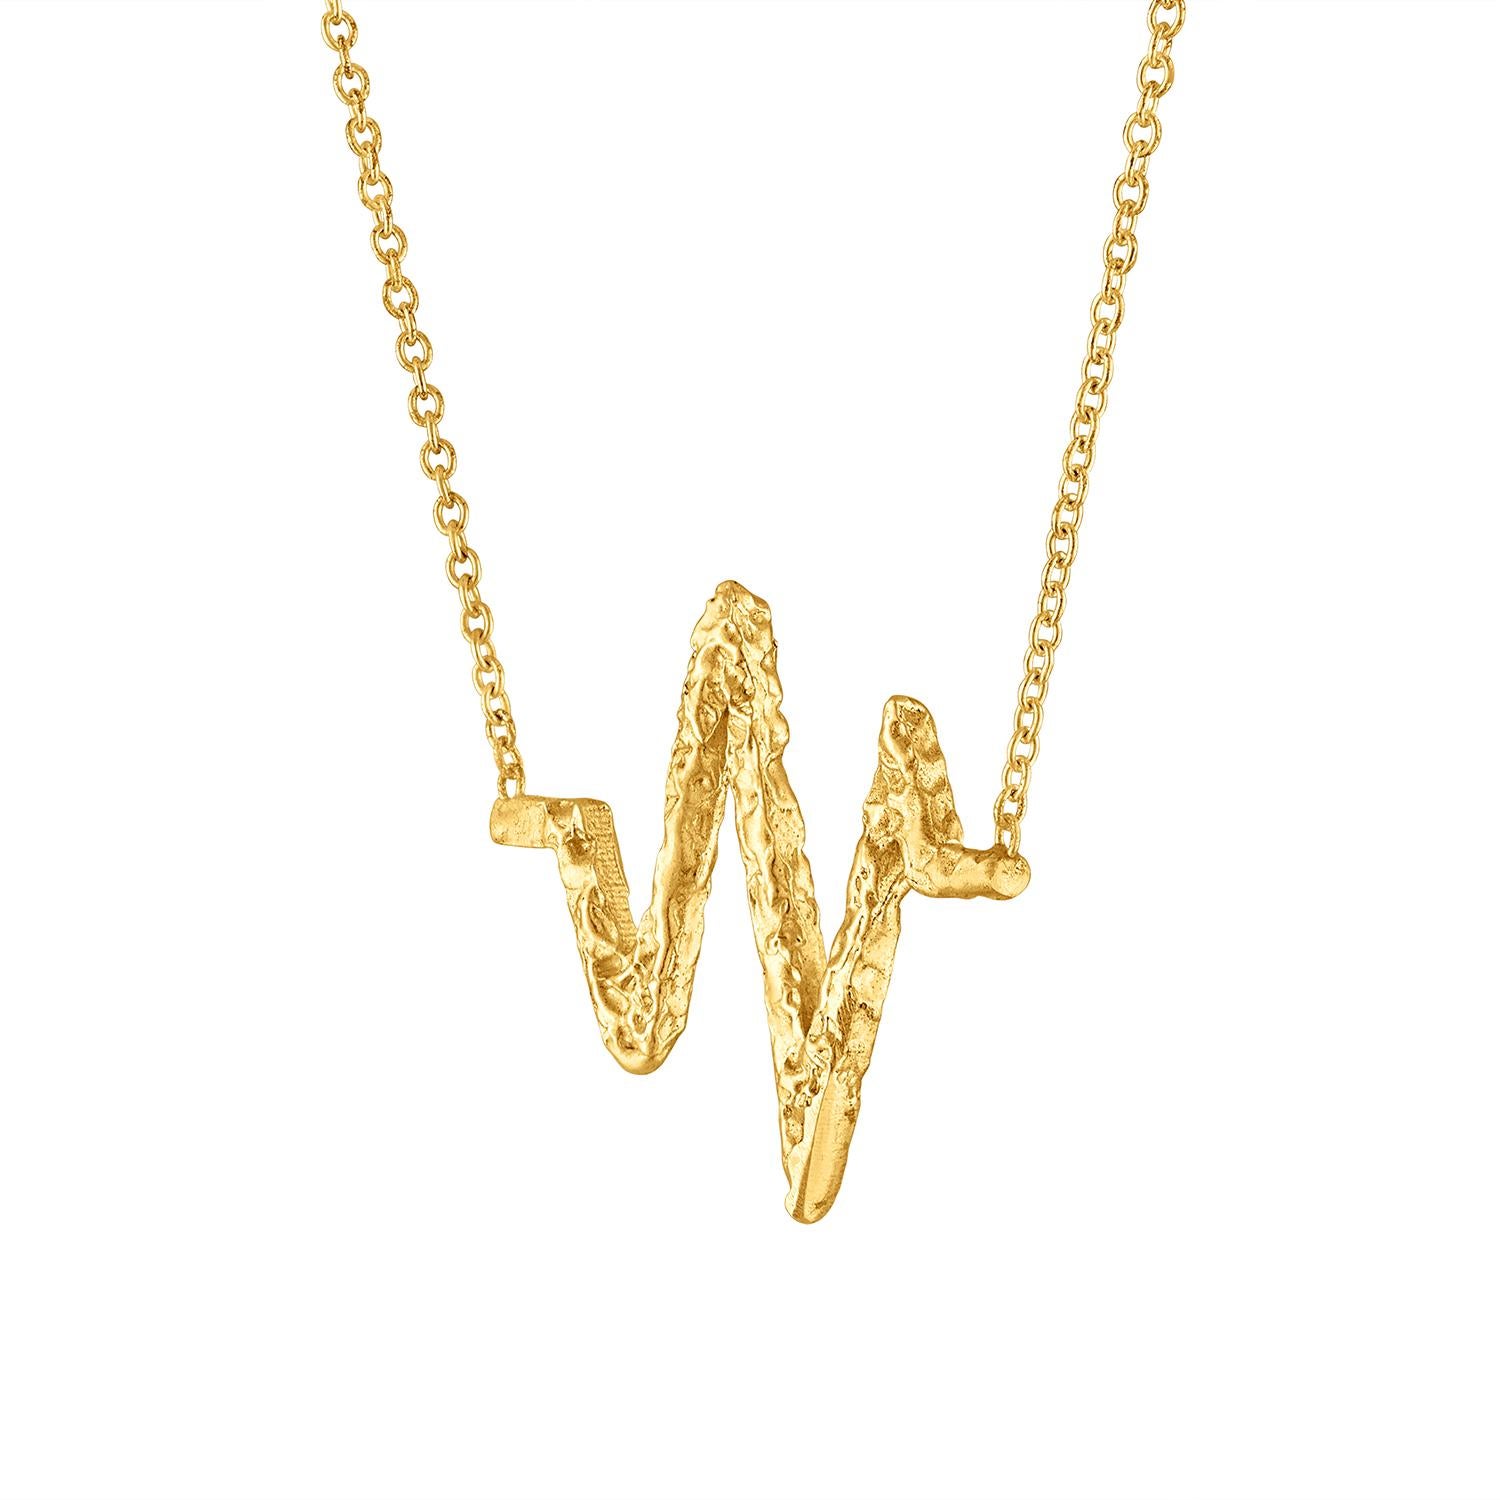 Frequency Symbol Necklace in 22k Gold, by Tagili In New Condition For Sale In New York, NY